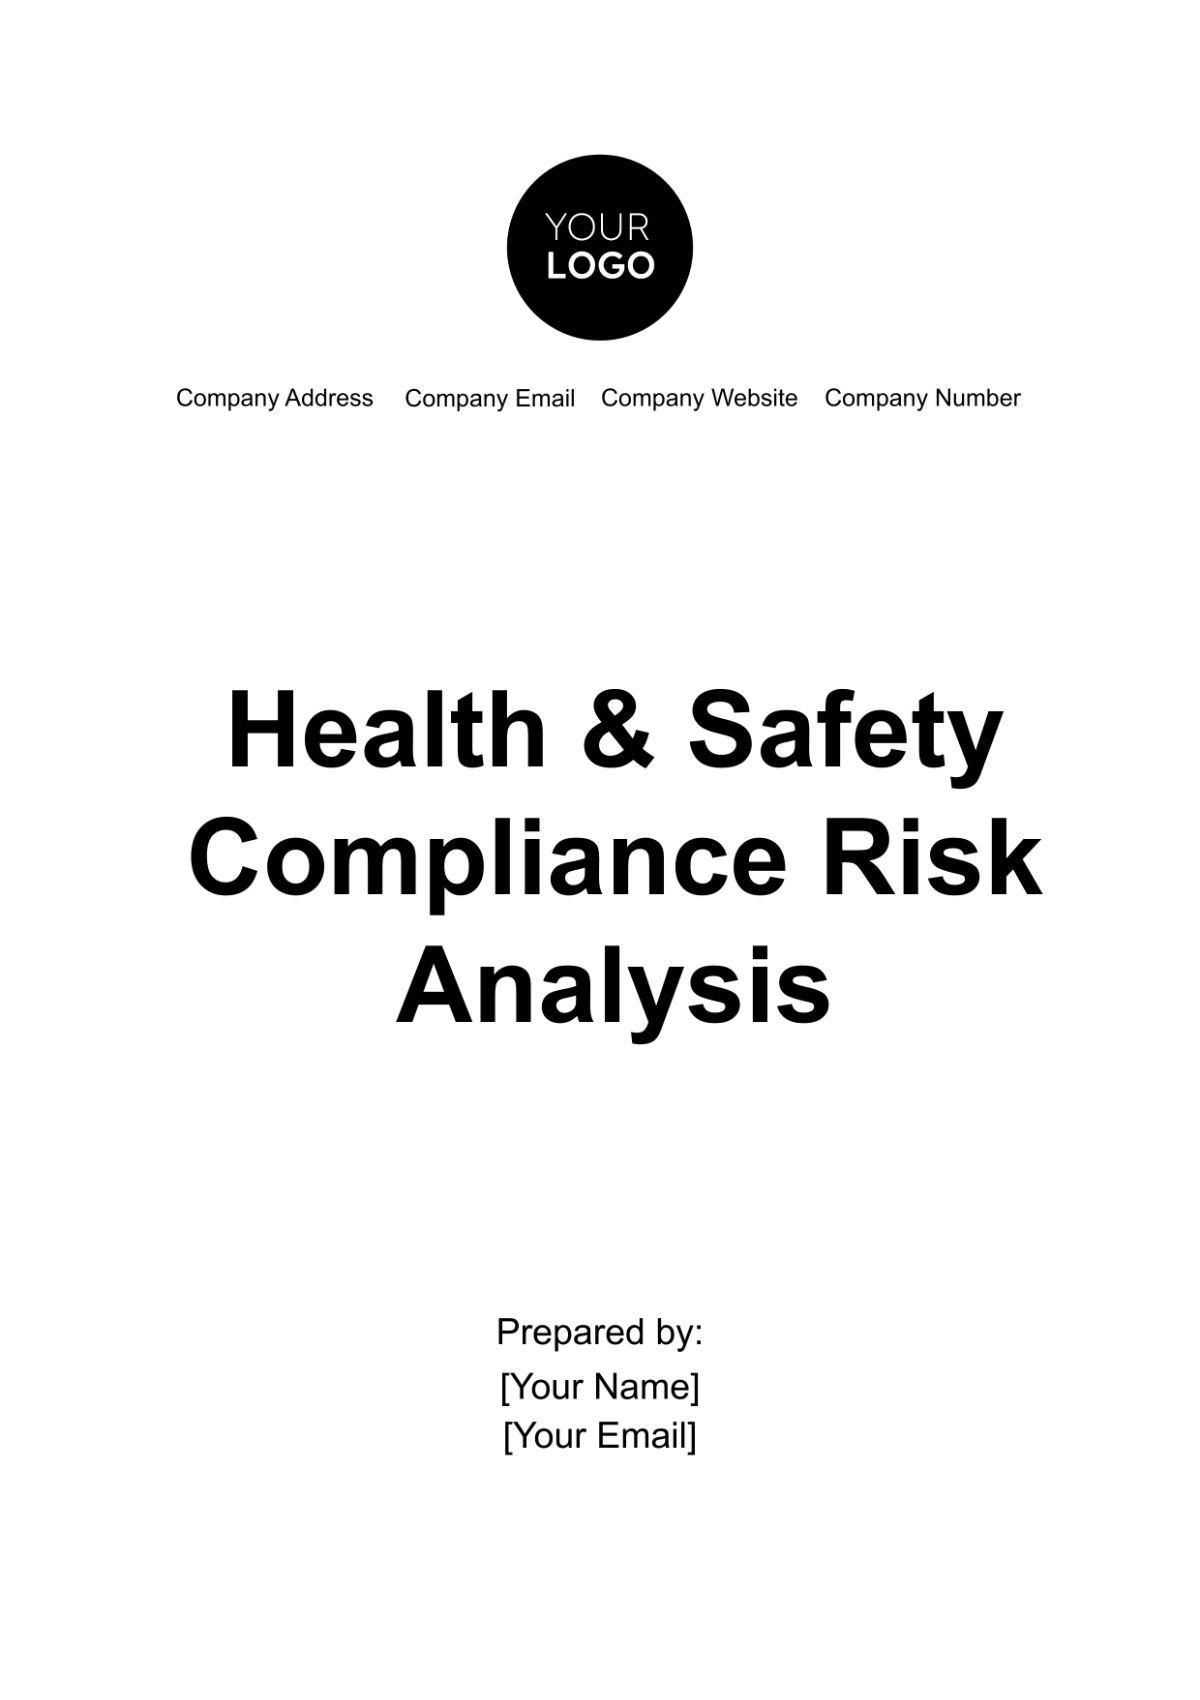 Health & Safety Compliance Risk Analysis Template